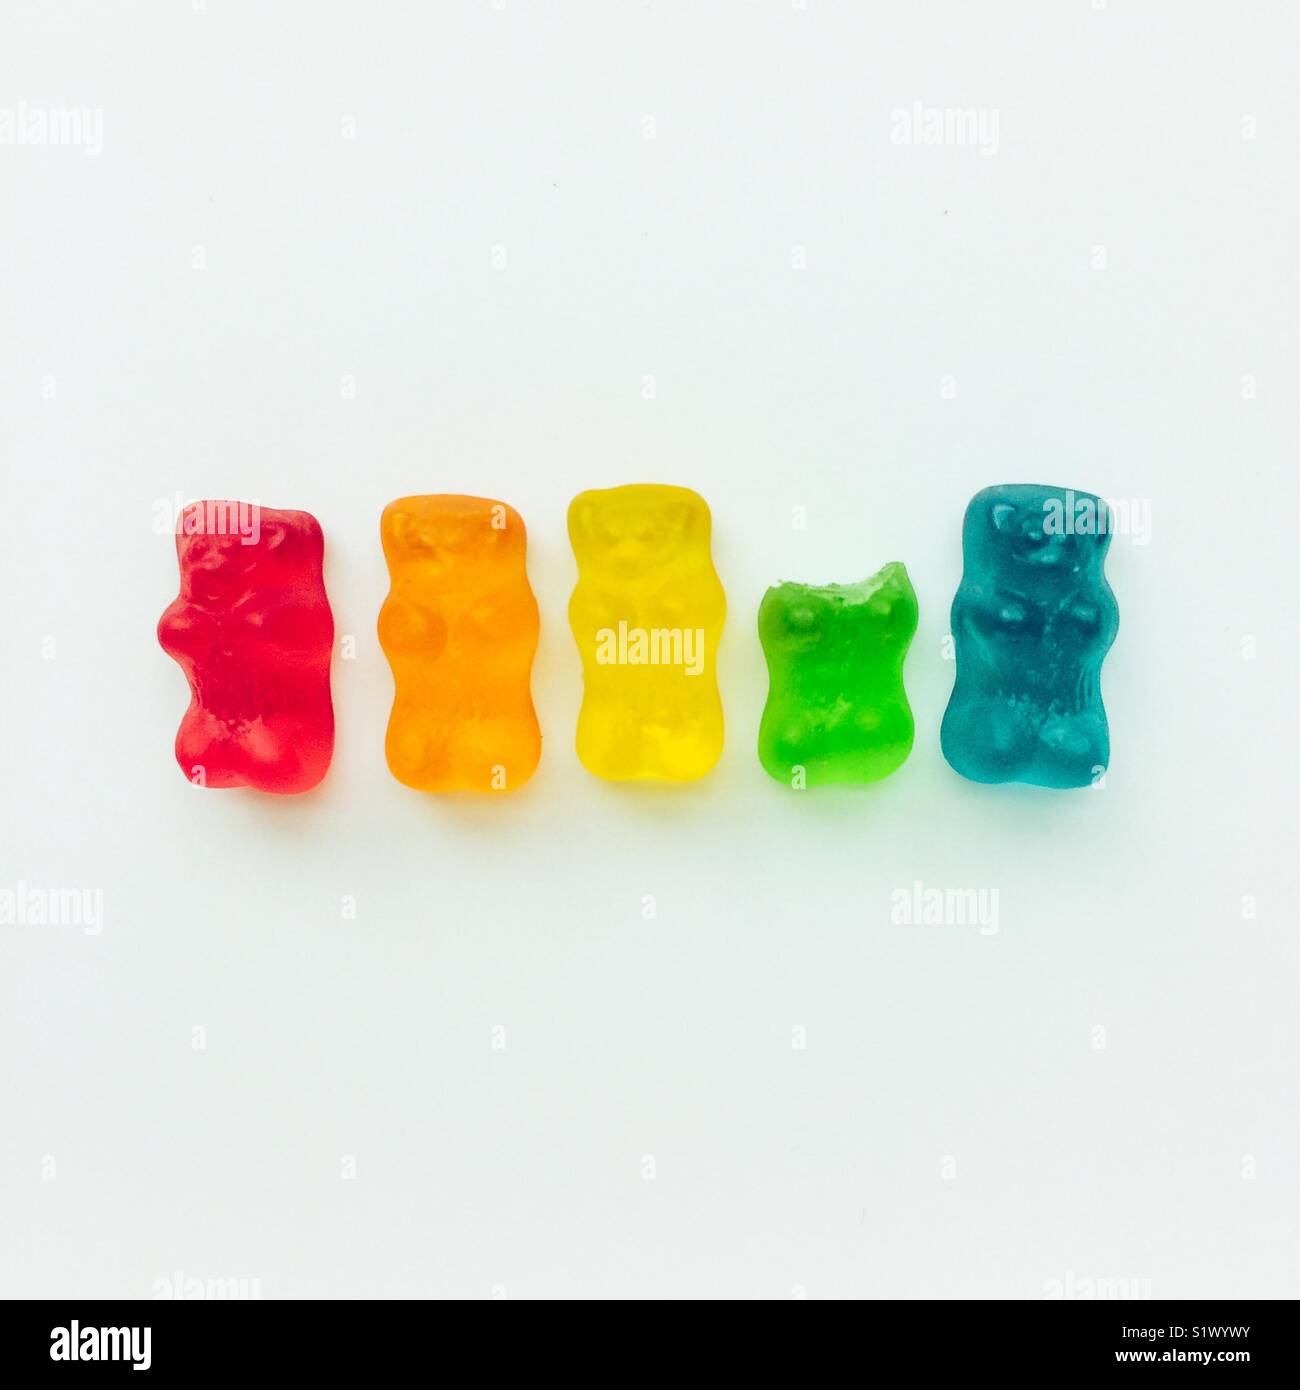 Gummy bears with a head missing Stock Photo